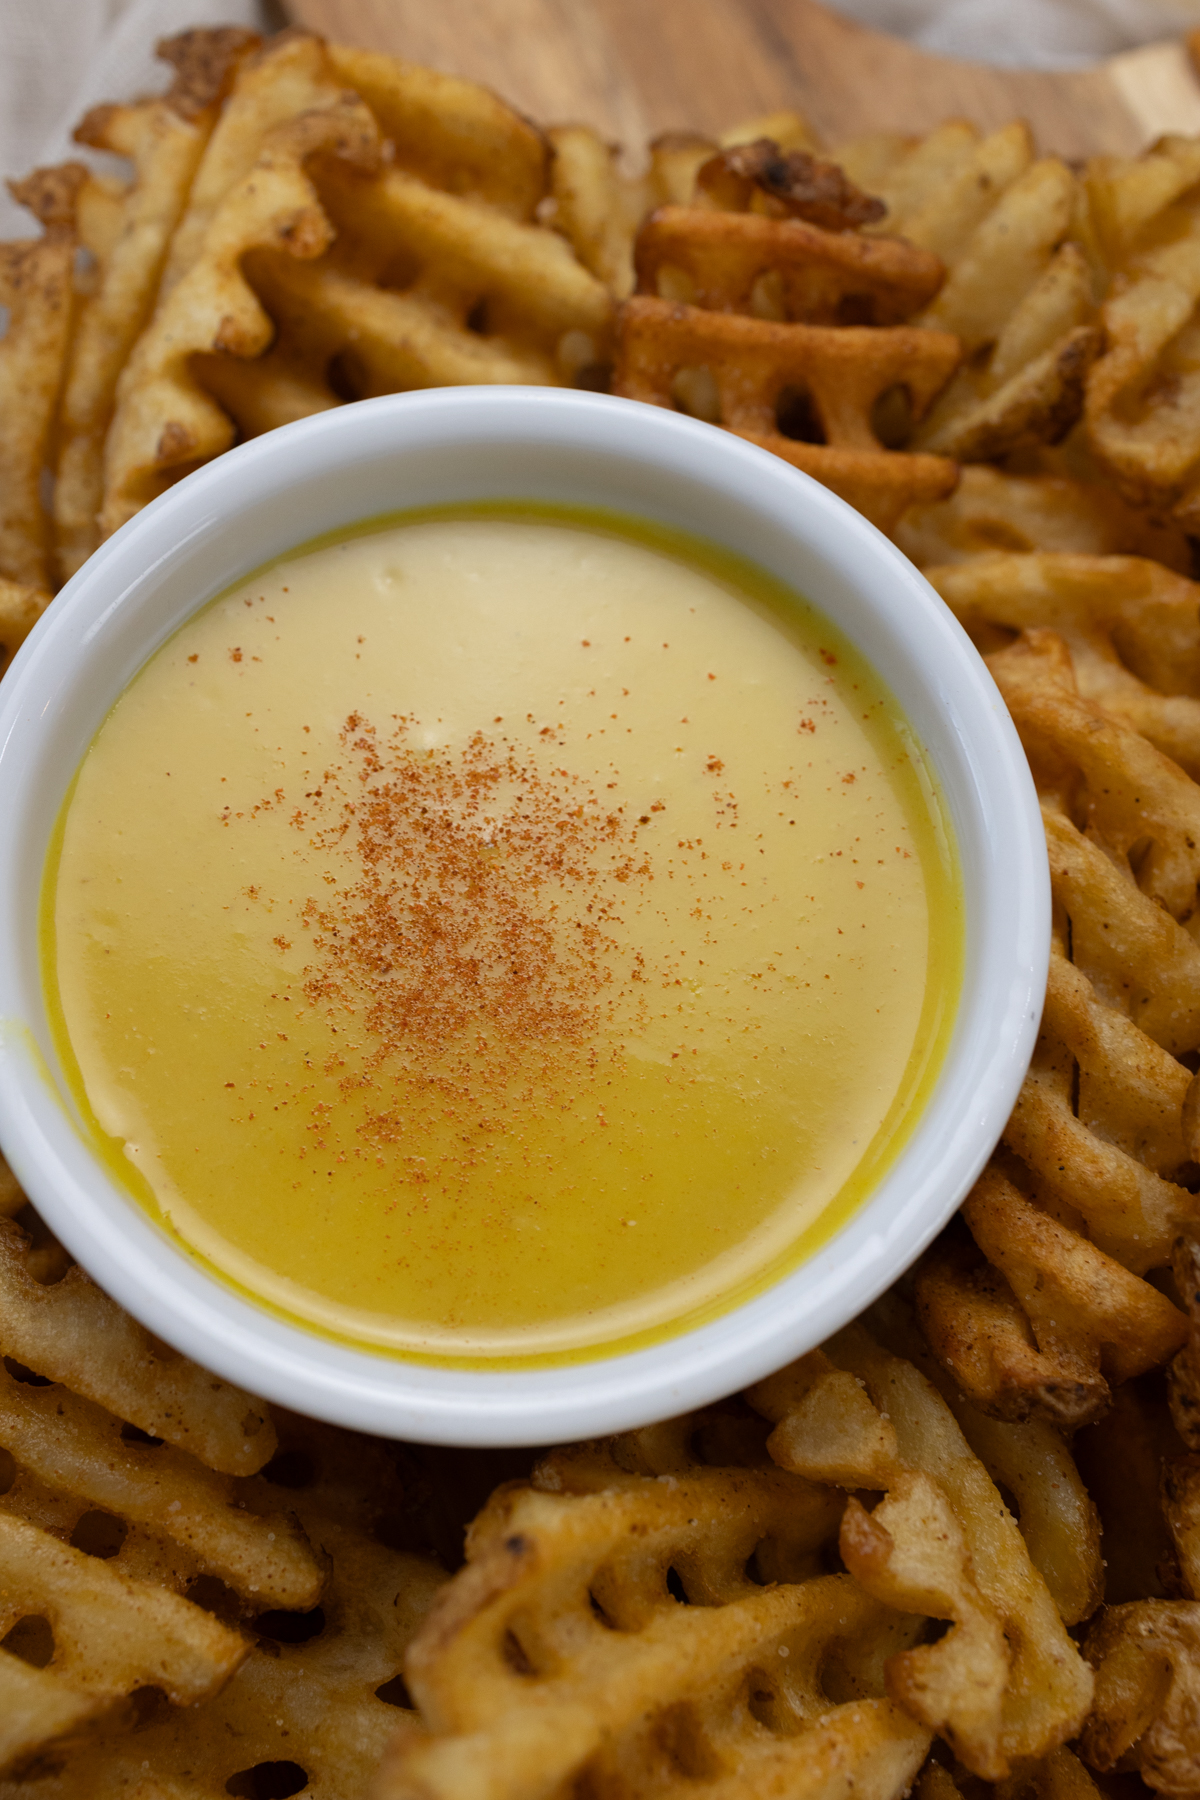 Top view of honey mustard dipping sauce in a small ramekin surrounded by waffle fries.